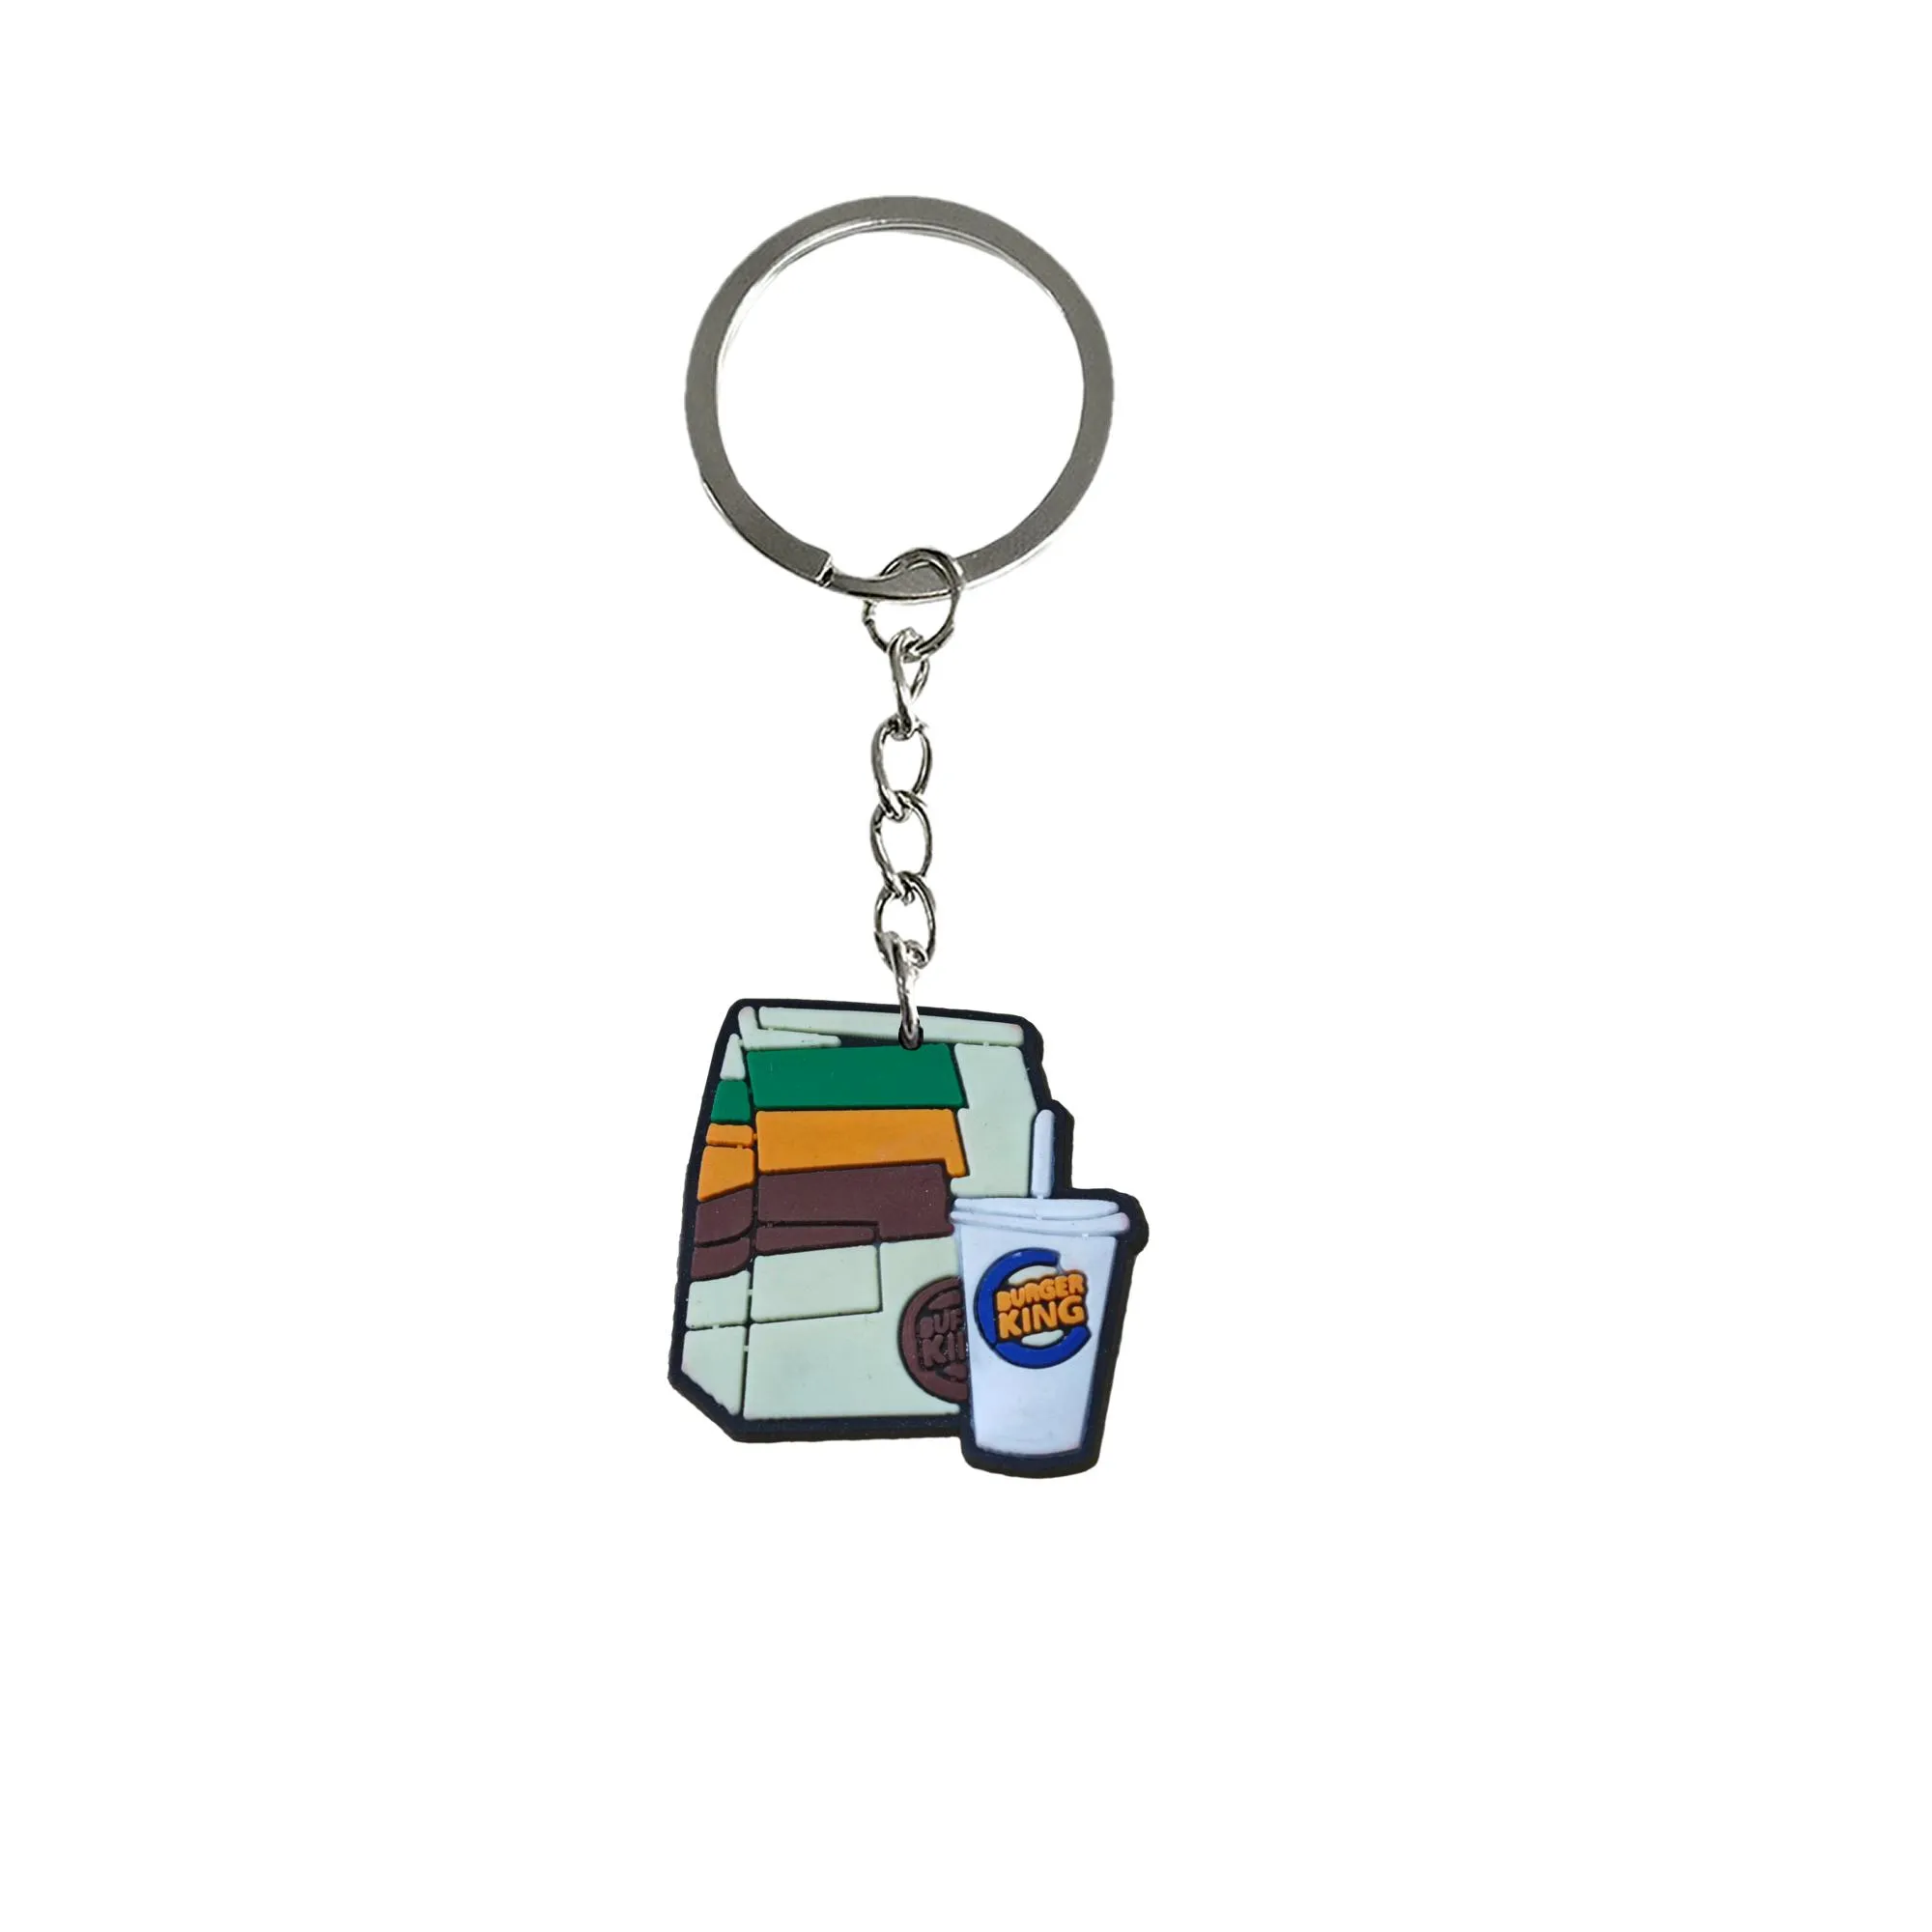 food keychain for birthday christmas party favors gift boys keychains key ring girls keyring suitable schoolbag mini cute classroom prizes tags goodie bag stuffer gifts chain fans